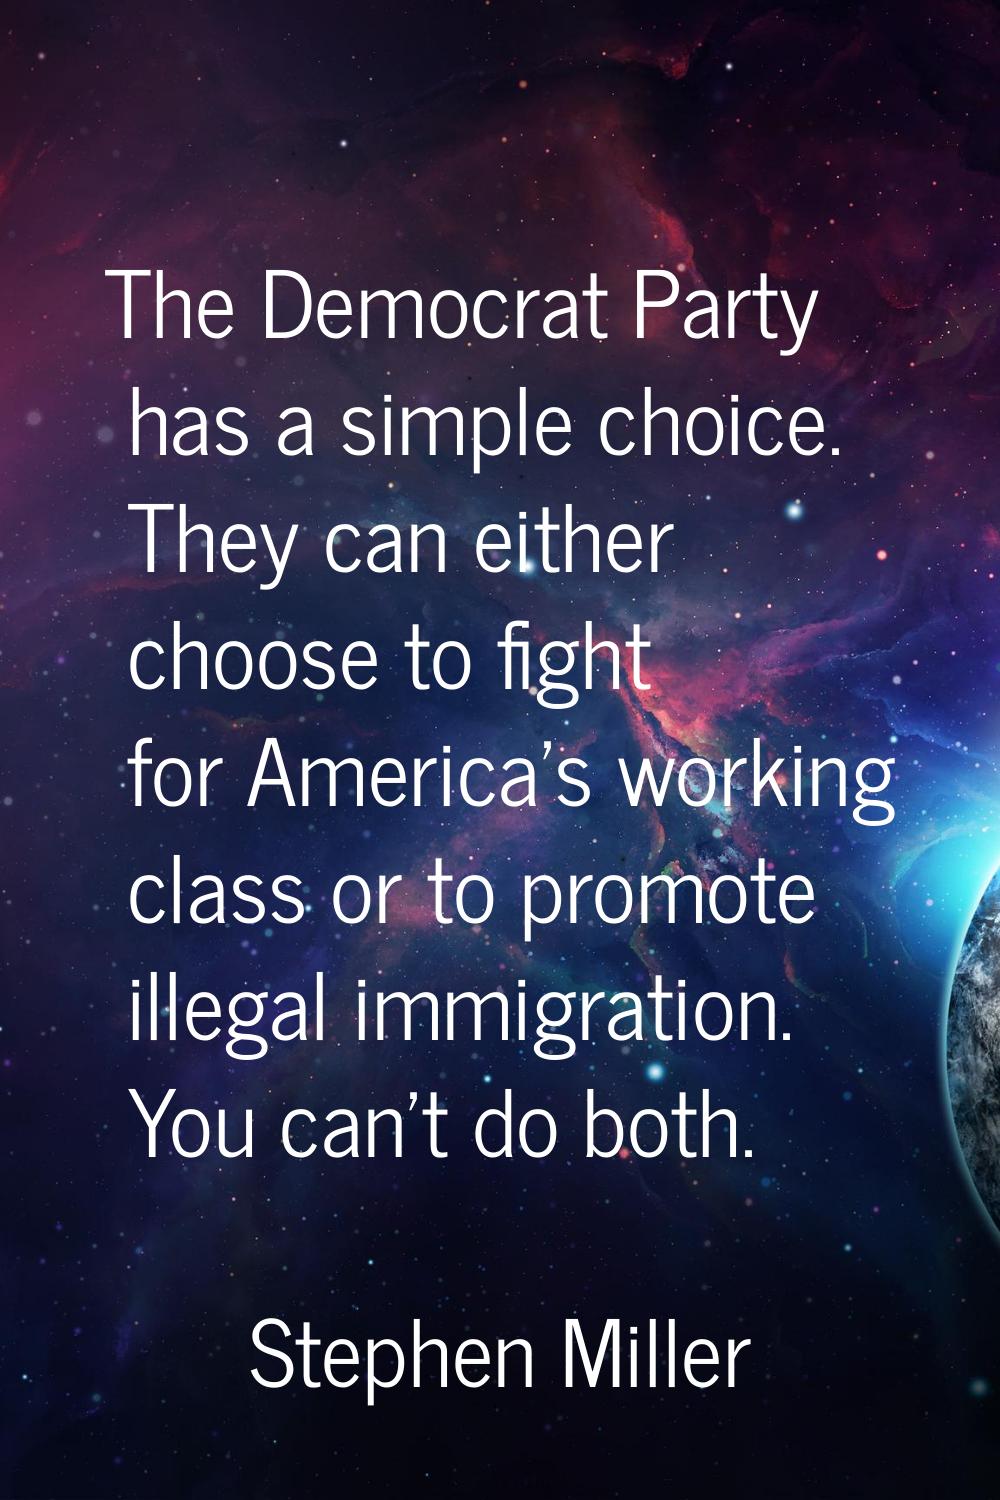 The Democrat Party has a simple choice. They can either choose to fight for America's working class